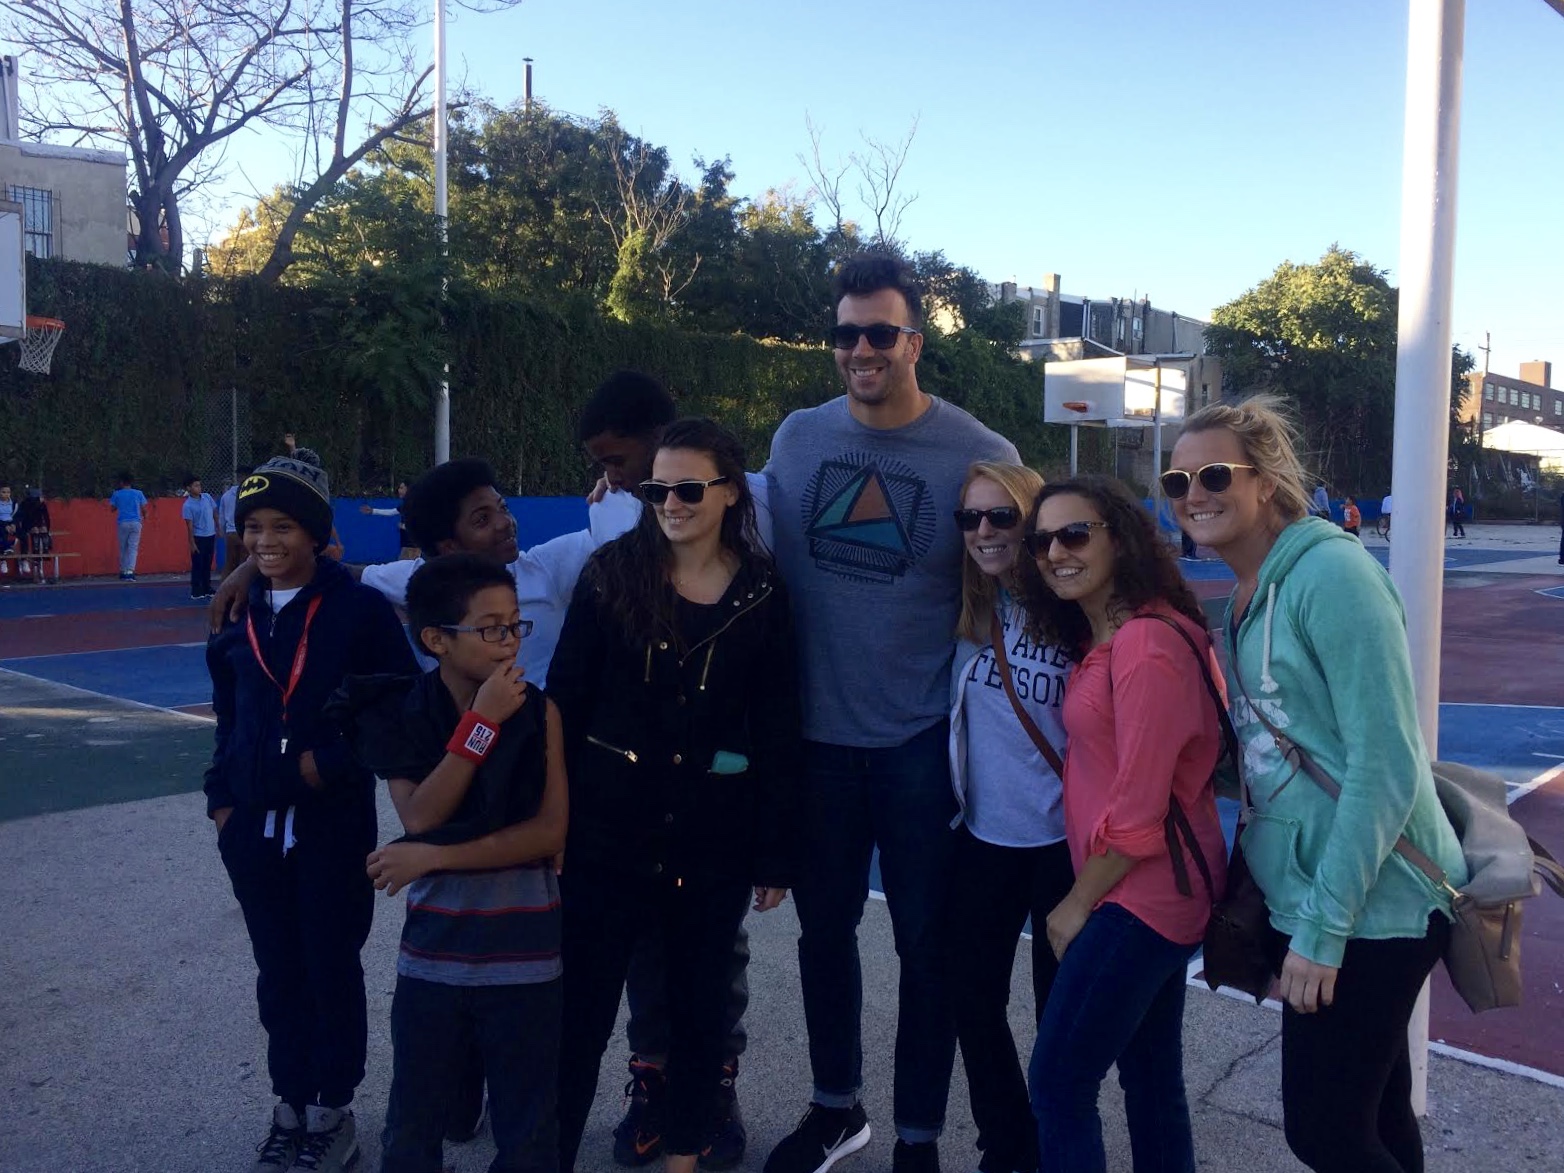 Connor Barwin's MTWB Foundation is investing in improvements to Waterloo Playground